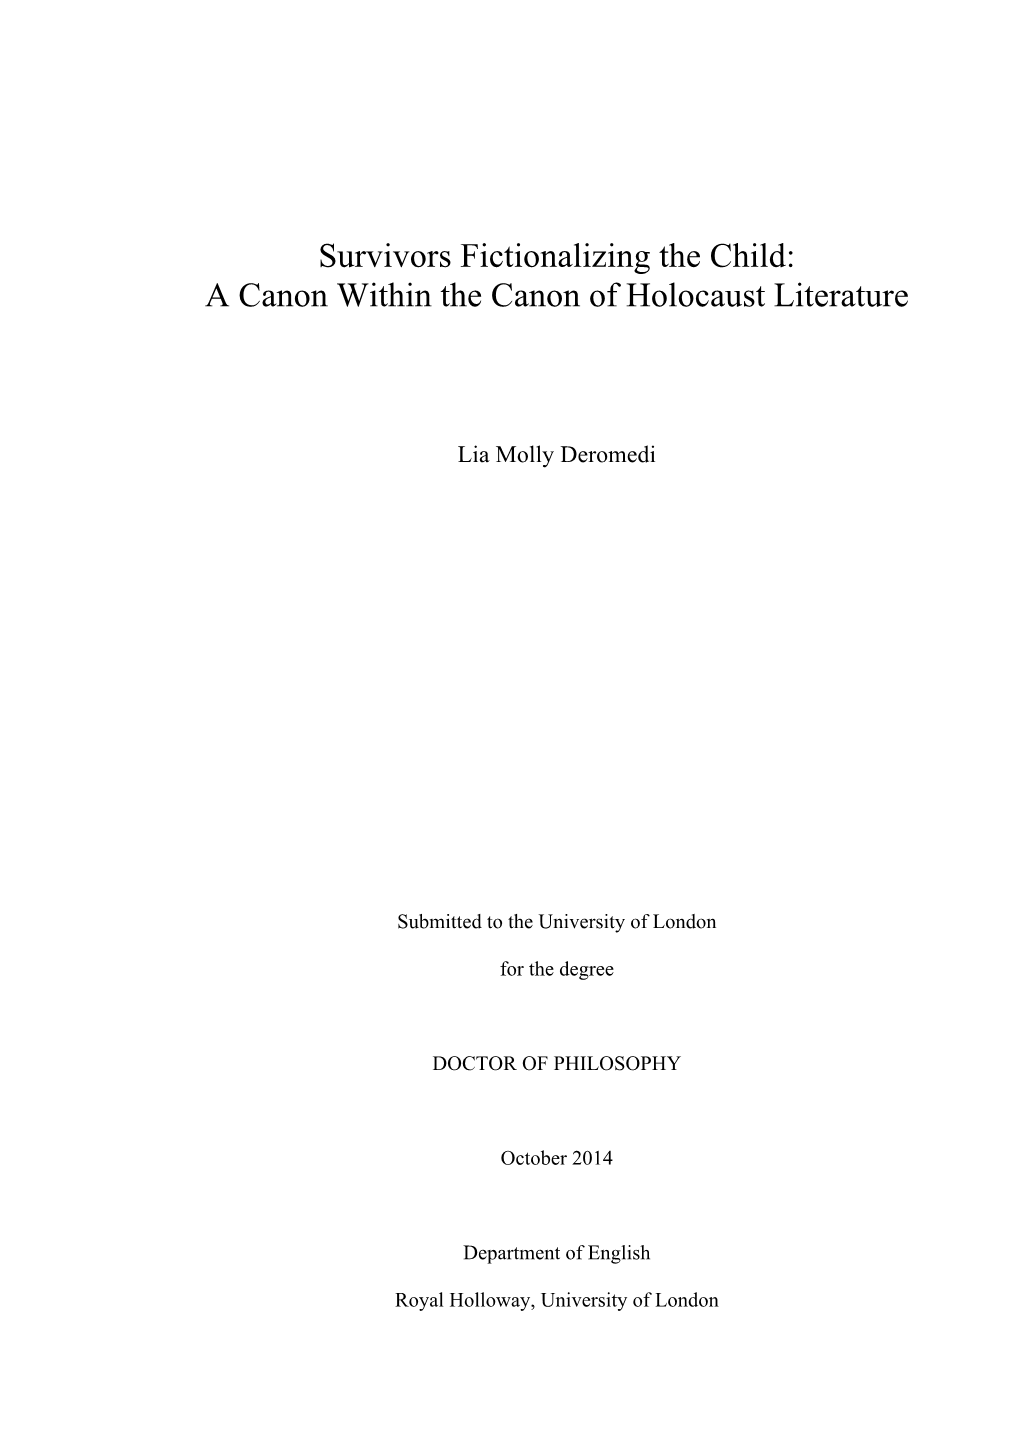 Survivors Fictionalizing the Child: a Canon Within the Canon of Holocaust Literature